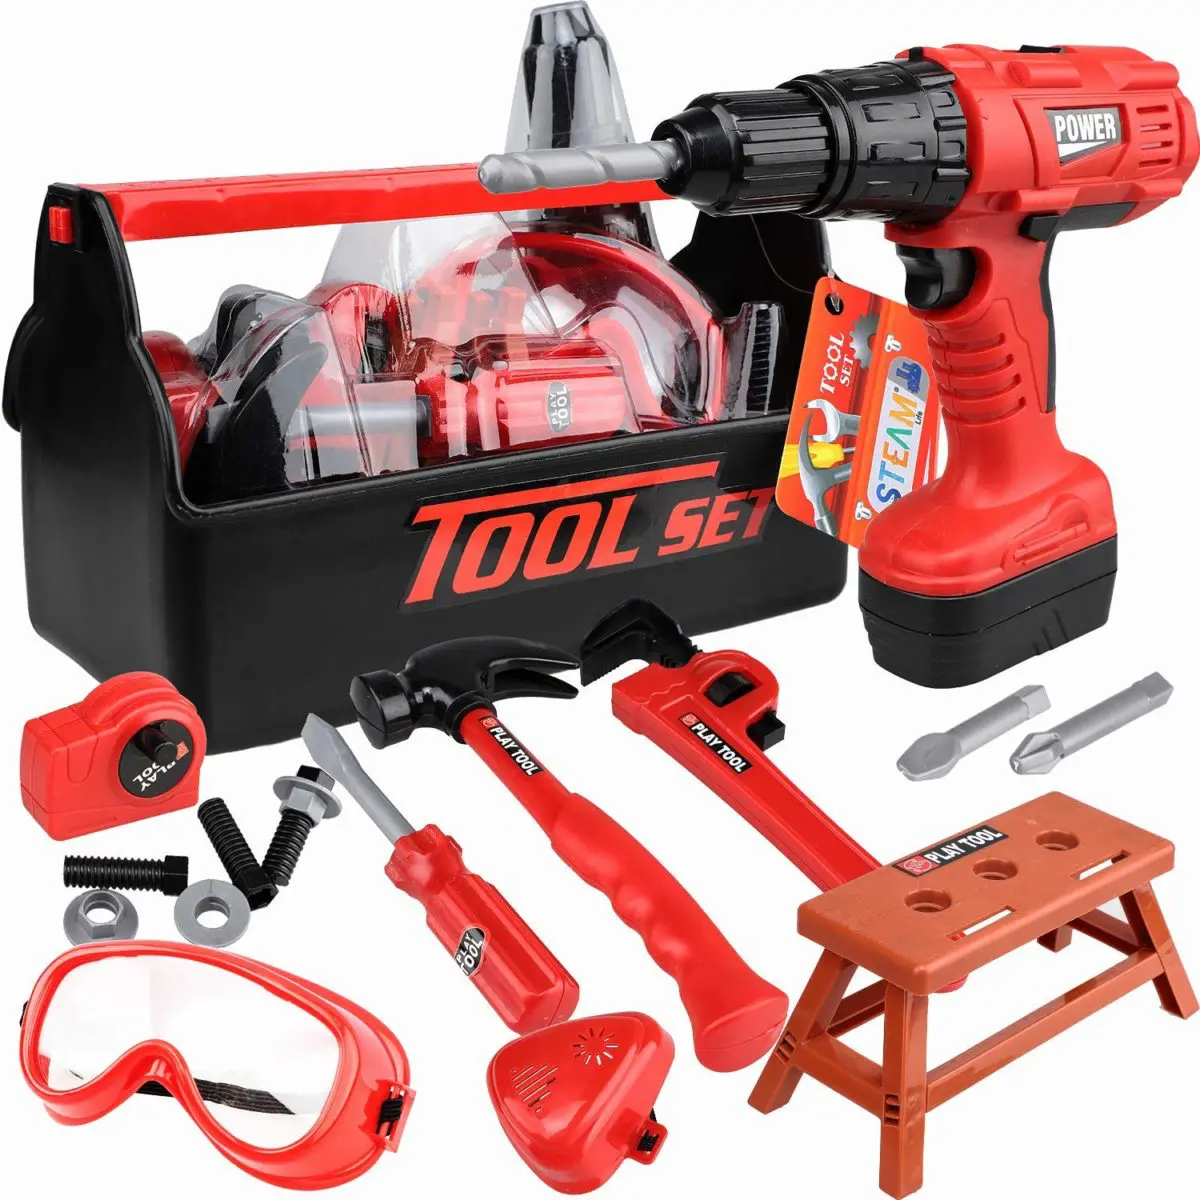 STEAM Life Kids Tool Set with Power Toy Drill - Top Toys and Gifts for Seven Year Old Boys 1